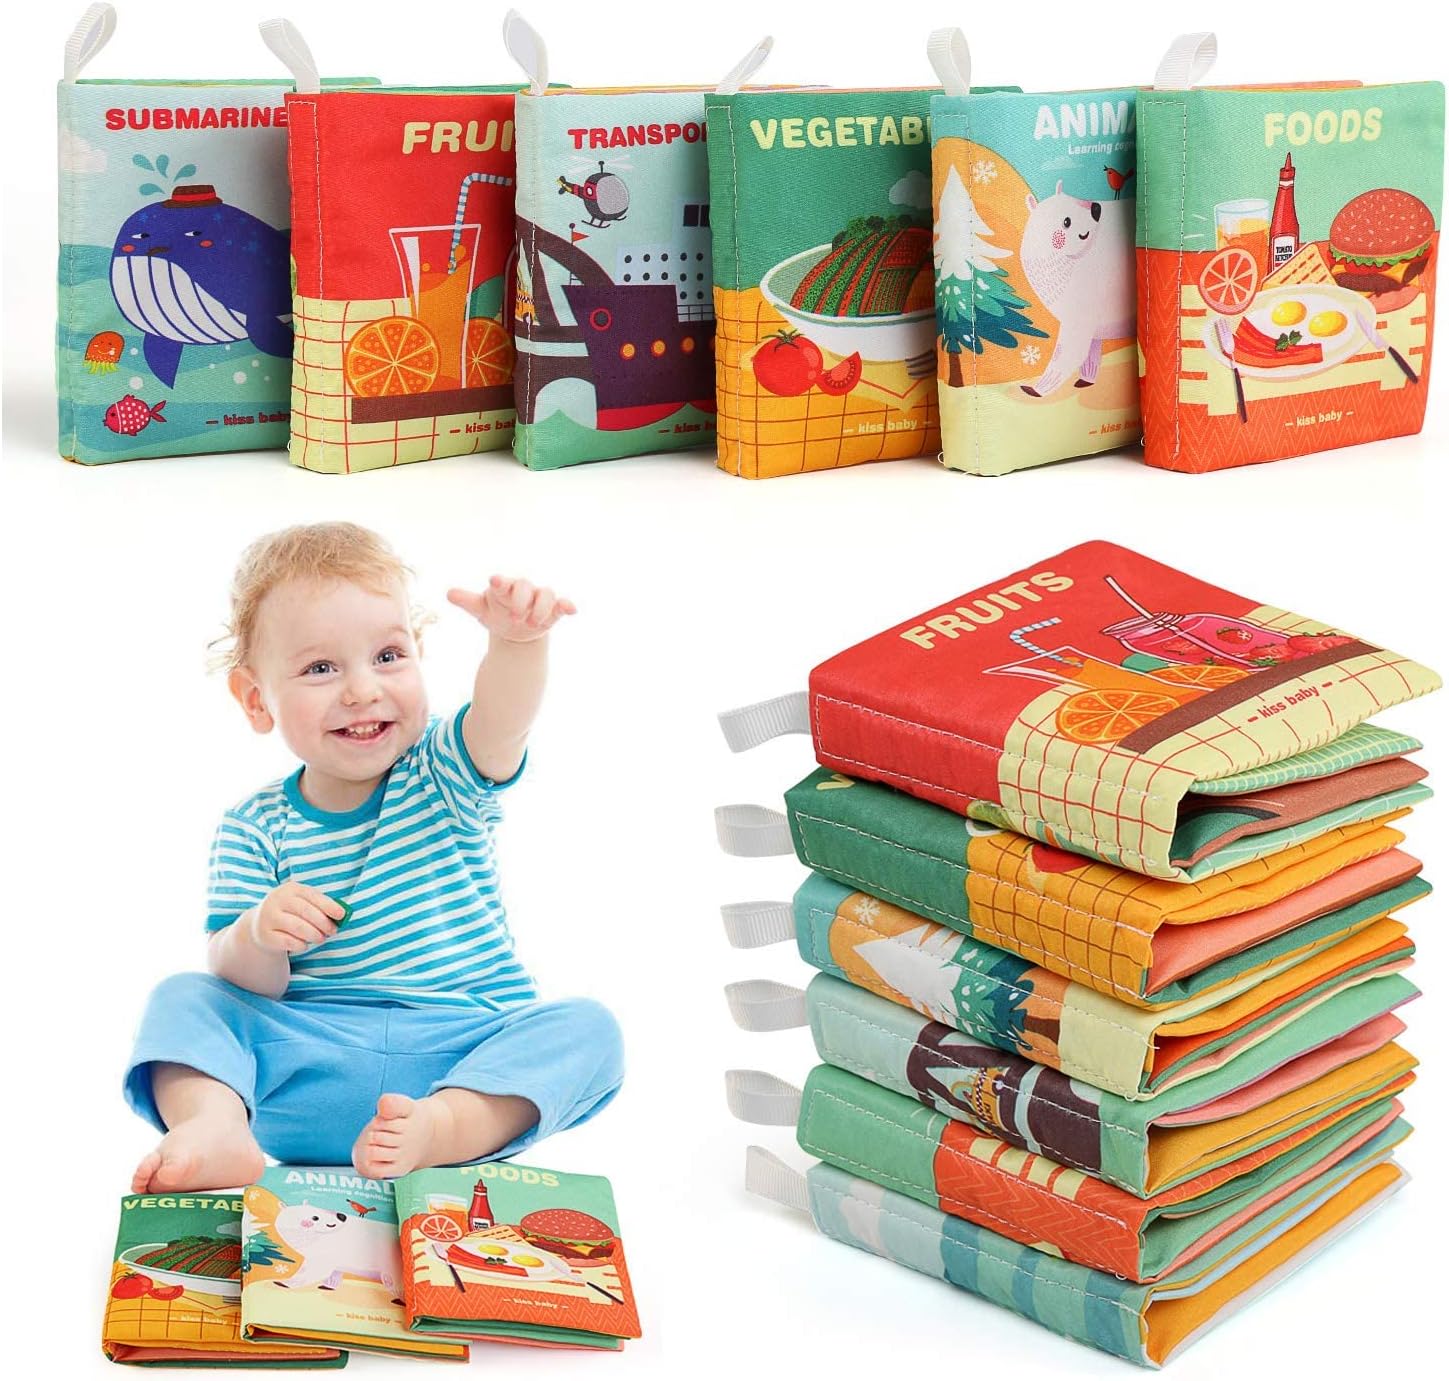 Kids Melody 6 Pcs Soft Books, Baby Cloth Books Non-Toxic Fabric Activity and Soft Crinkle Baby Books